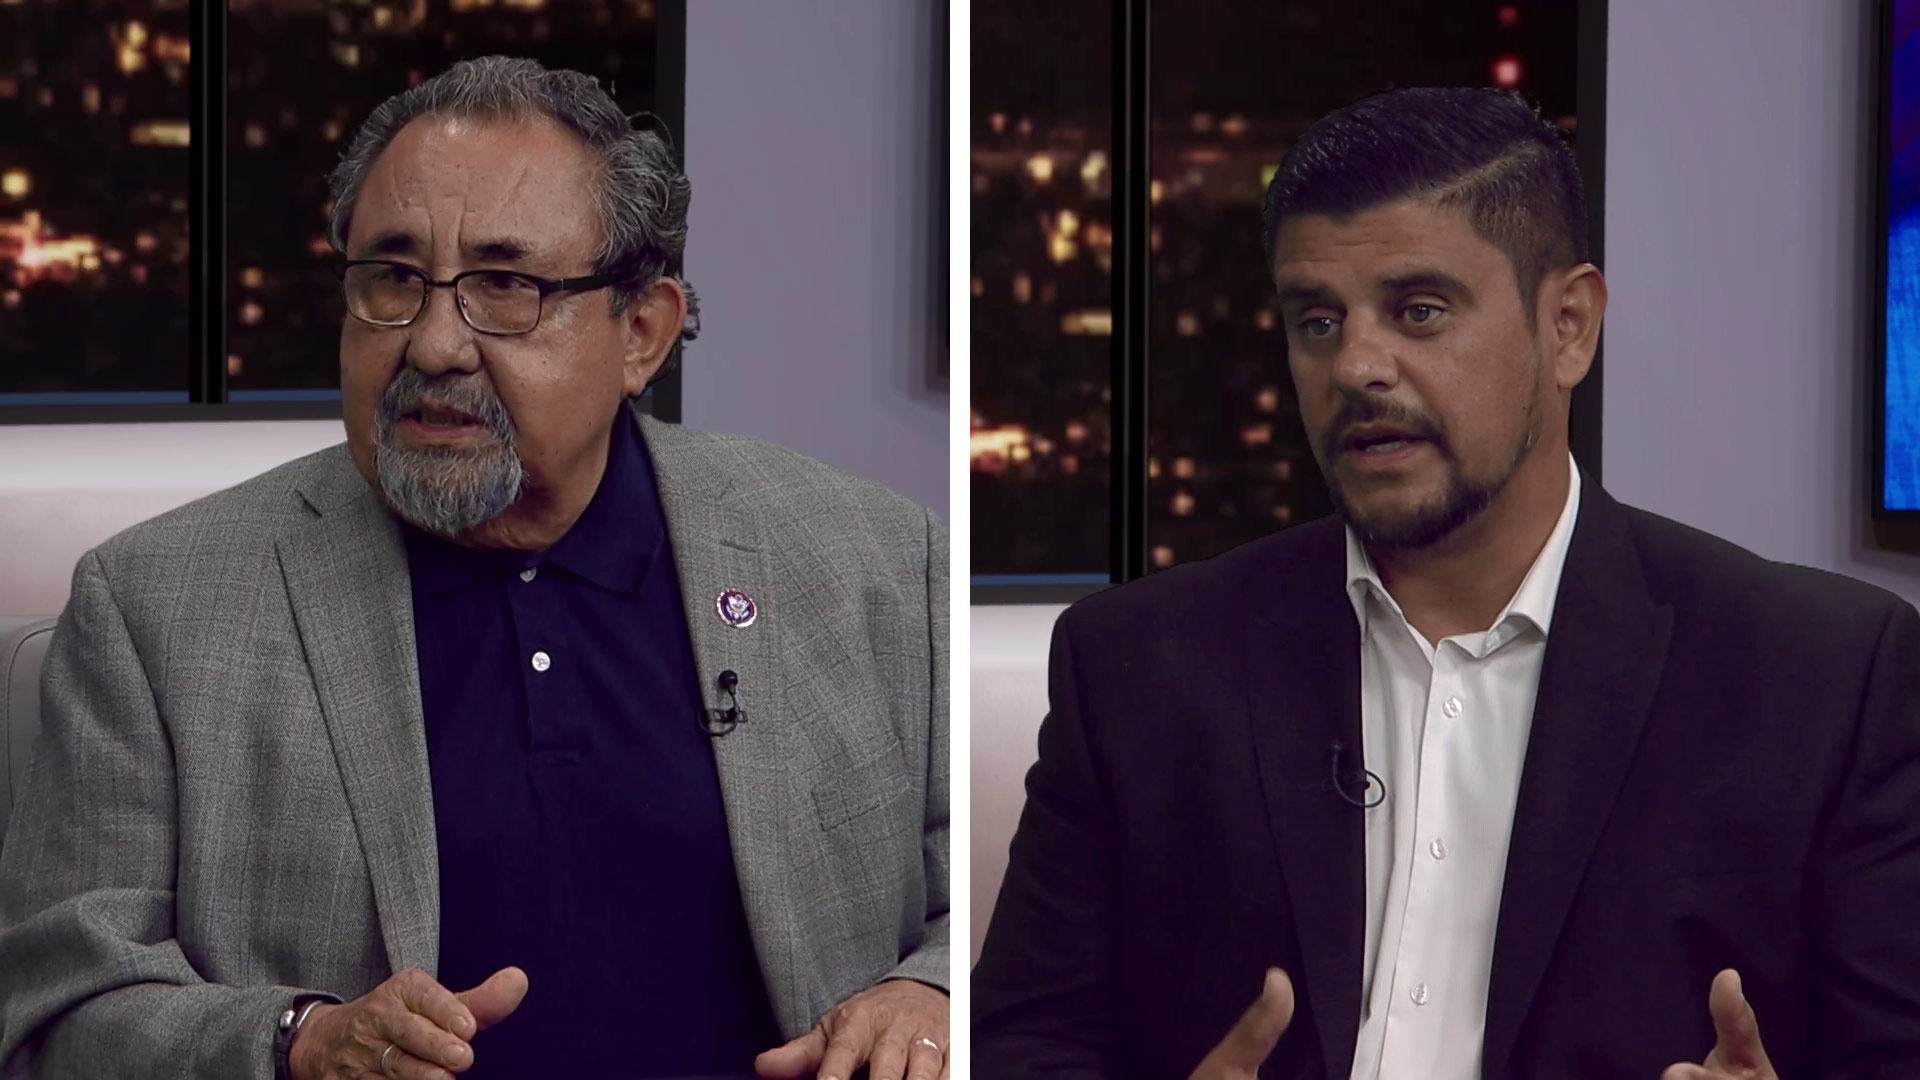 Arizona CD7 candidates Raul Grijalva (D - left) and Luis Pozzolo (R - right) during the October 21, 2022 episode of Your Vote.